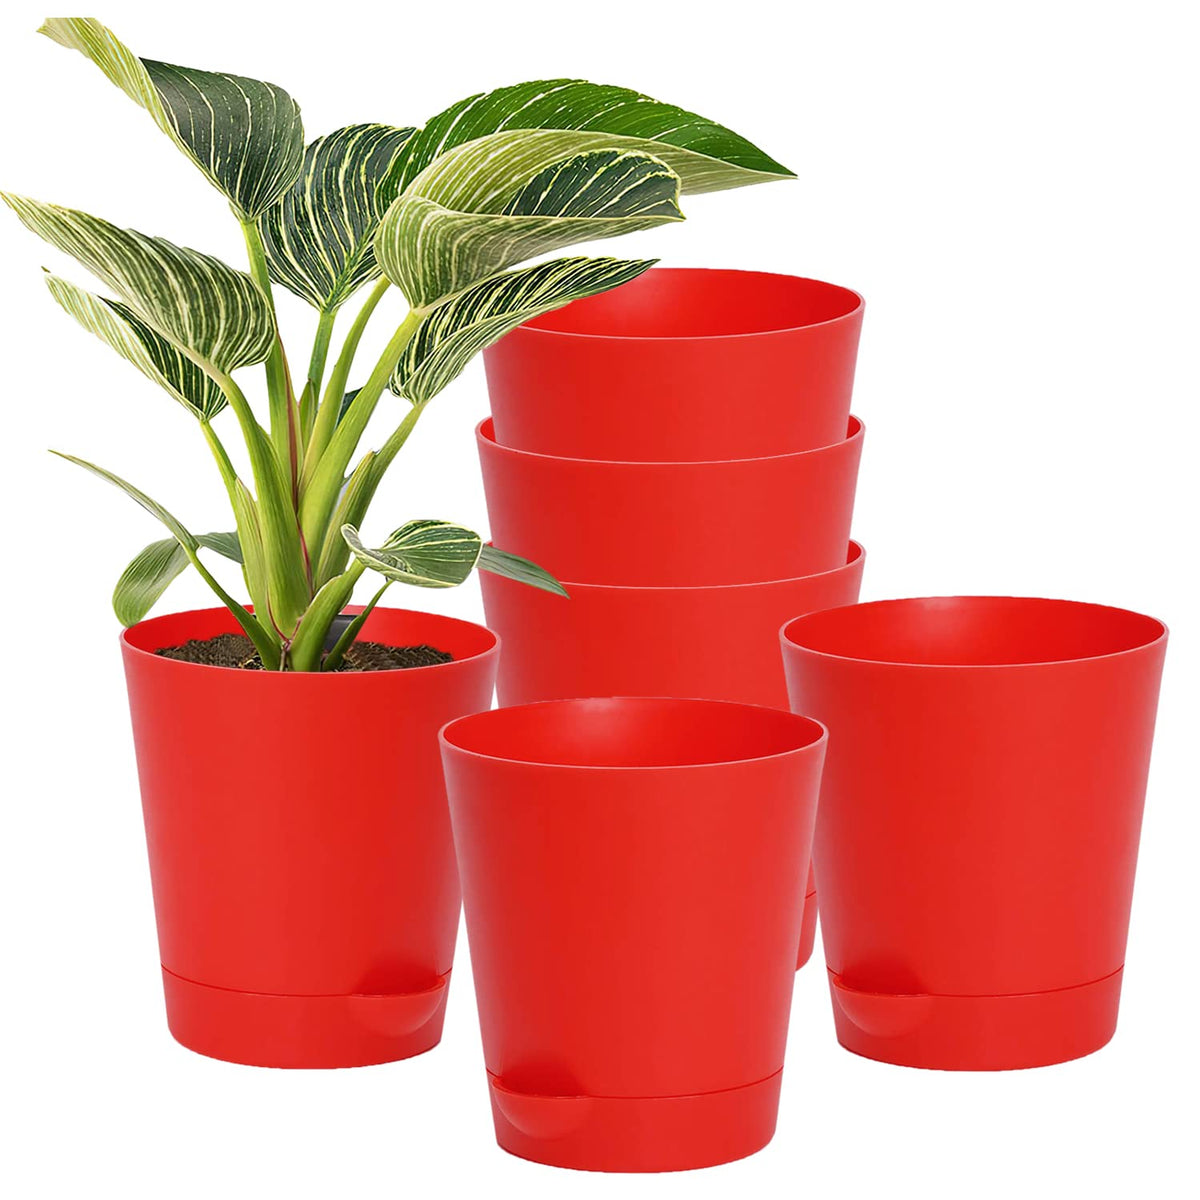 Kuber Industries Plastic Titan Pot|Garden Container for Plants & Flowers|Self-Watering Pot with Drainage Holes,6 Inch,Pack of 6 (Red)